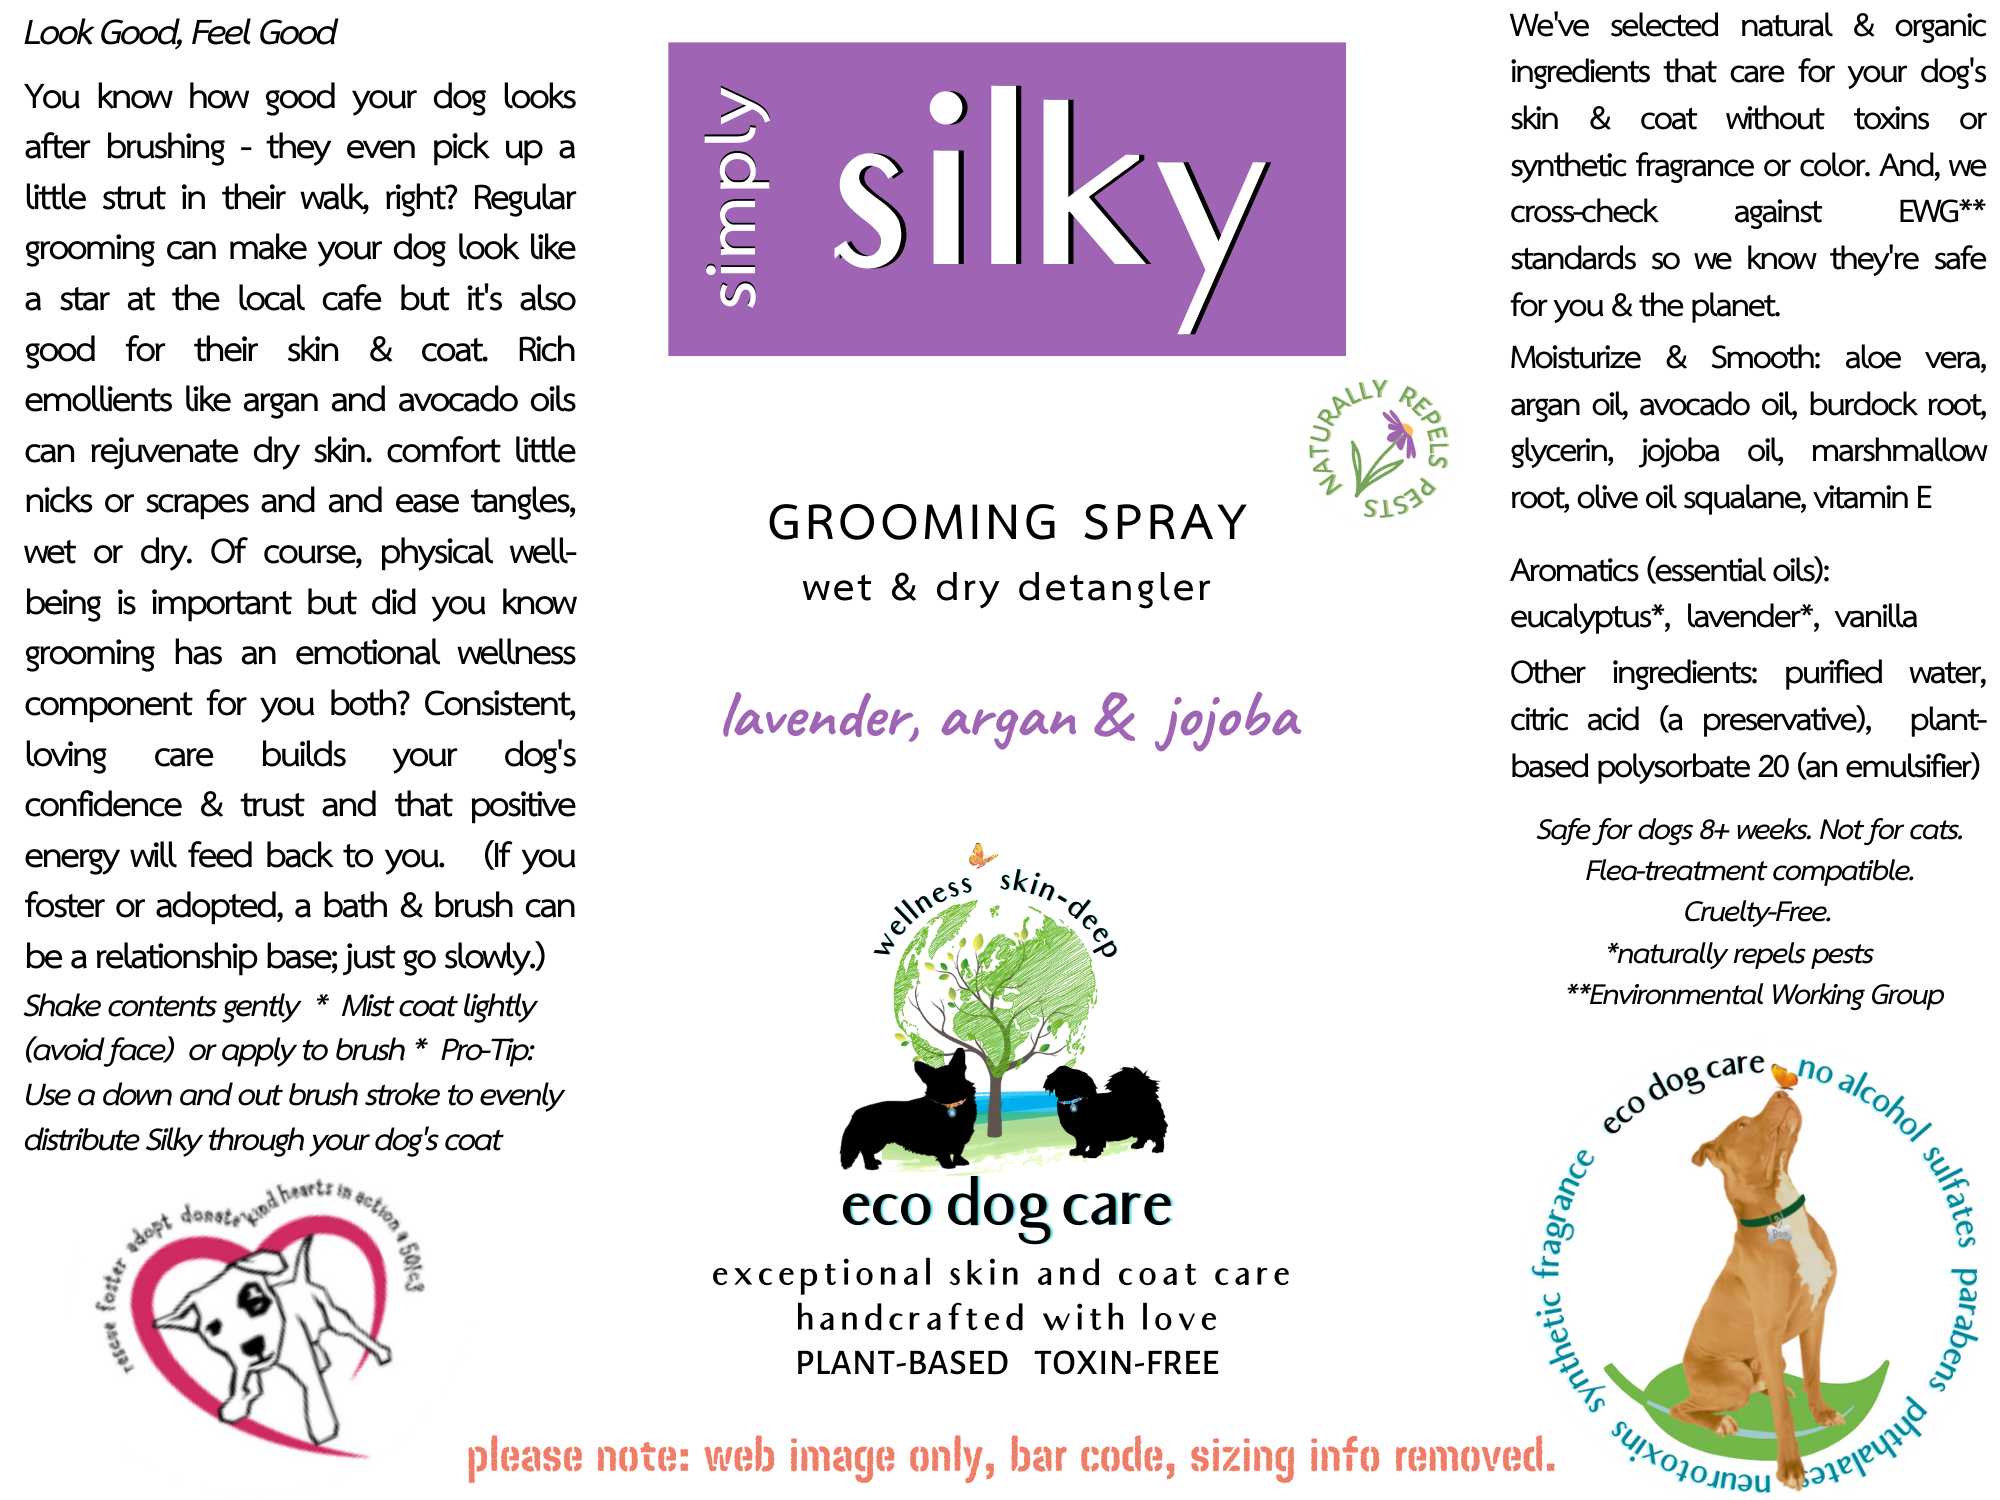 Simply Silky Grooming Spray For Wet or Dry Detangling Eco Dog Care